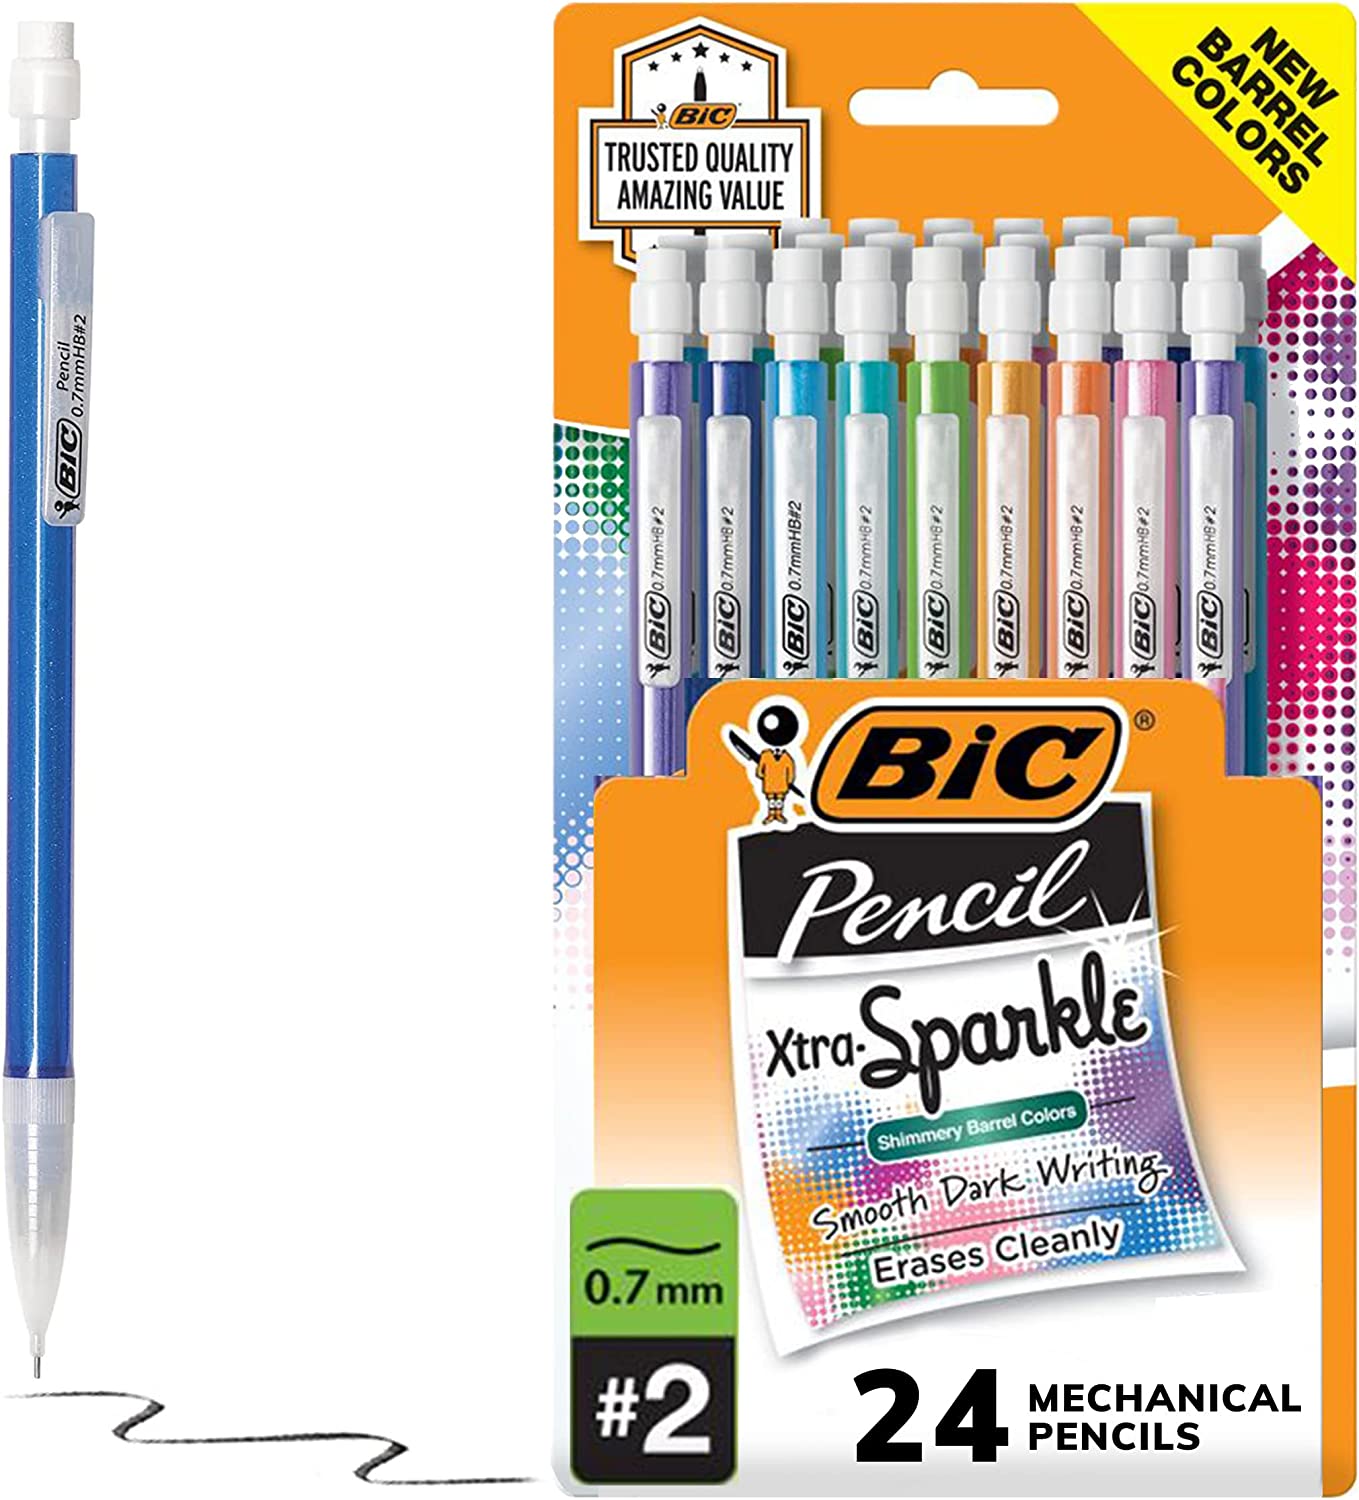 BIC Xtra-Sparkle Mechanical Pencil, Medium Point (0.7 mm), 24-Count, Refillable Design for Long-Lasting Use